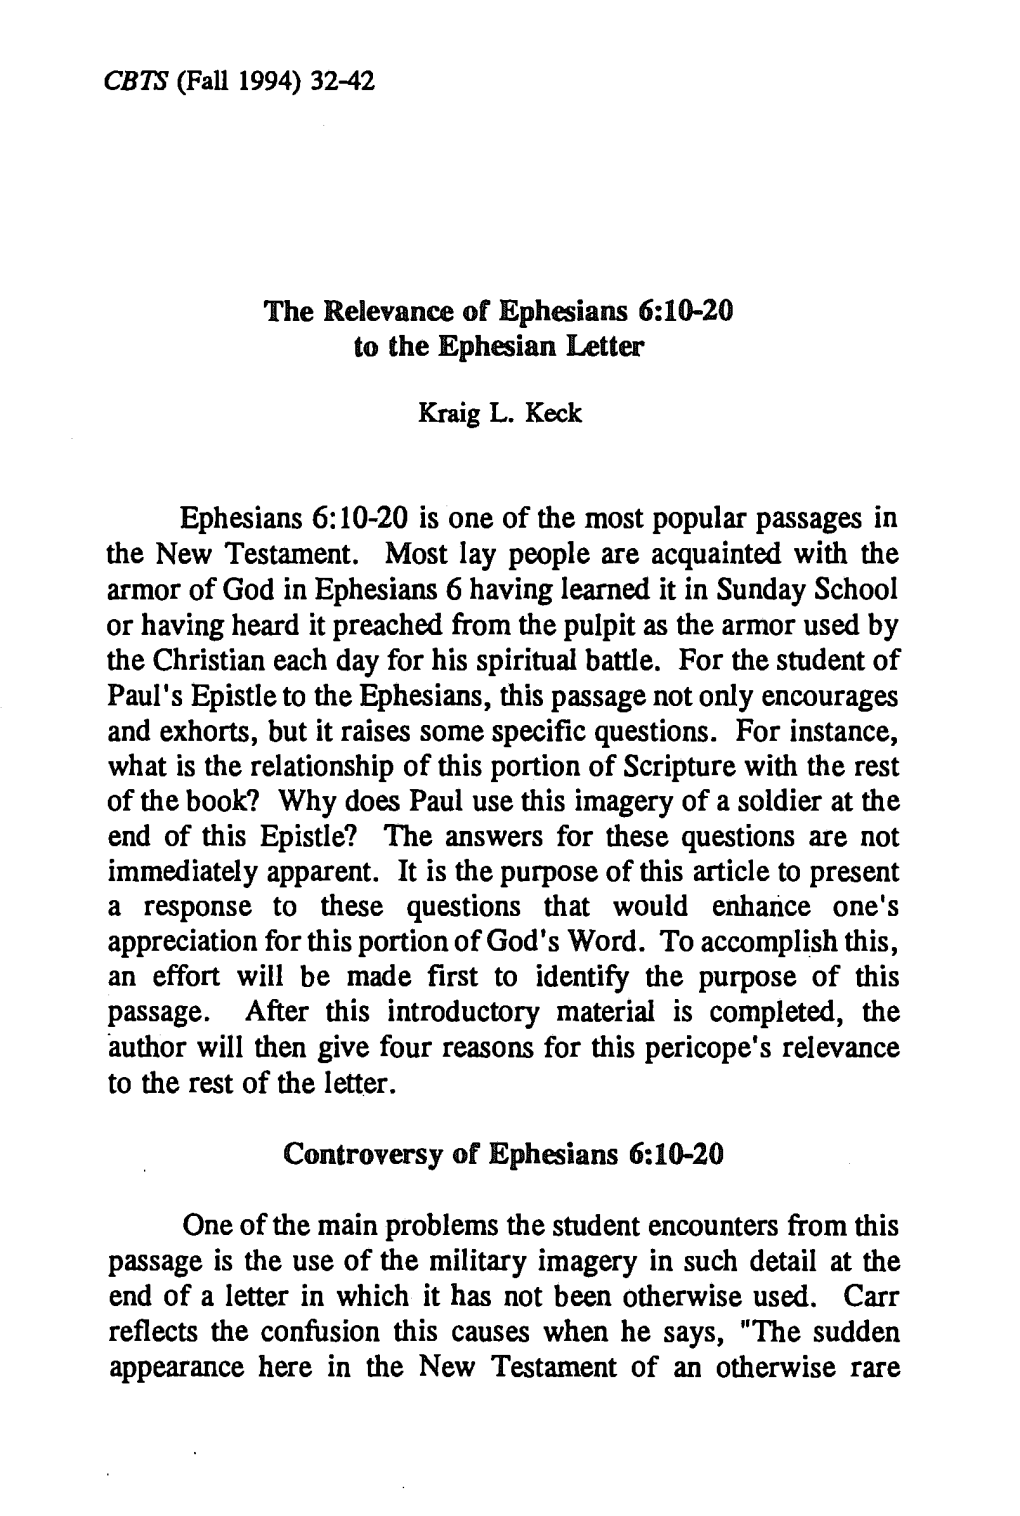 The Relevance of Ephesians 6:10-20 to the Ephesian Letter